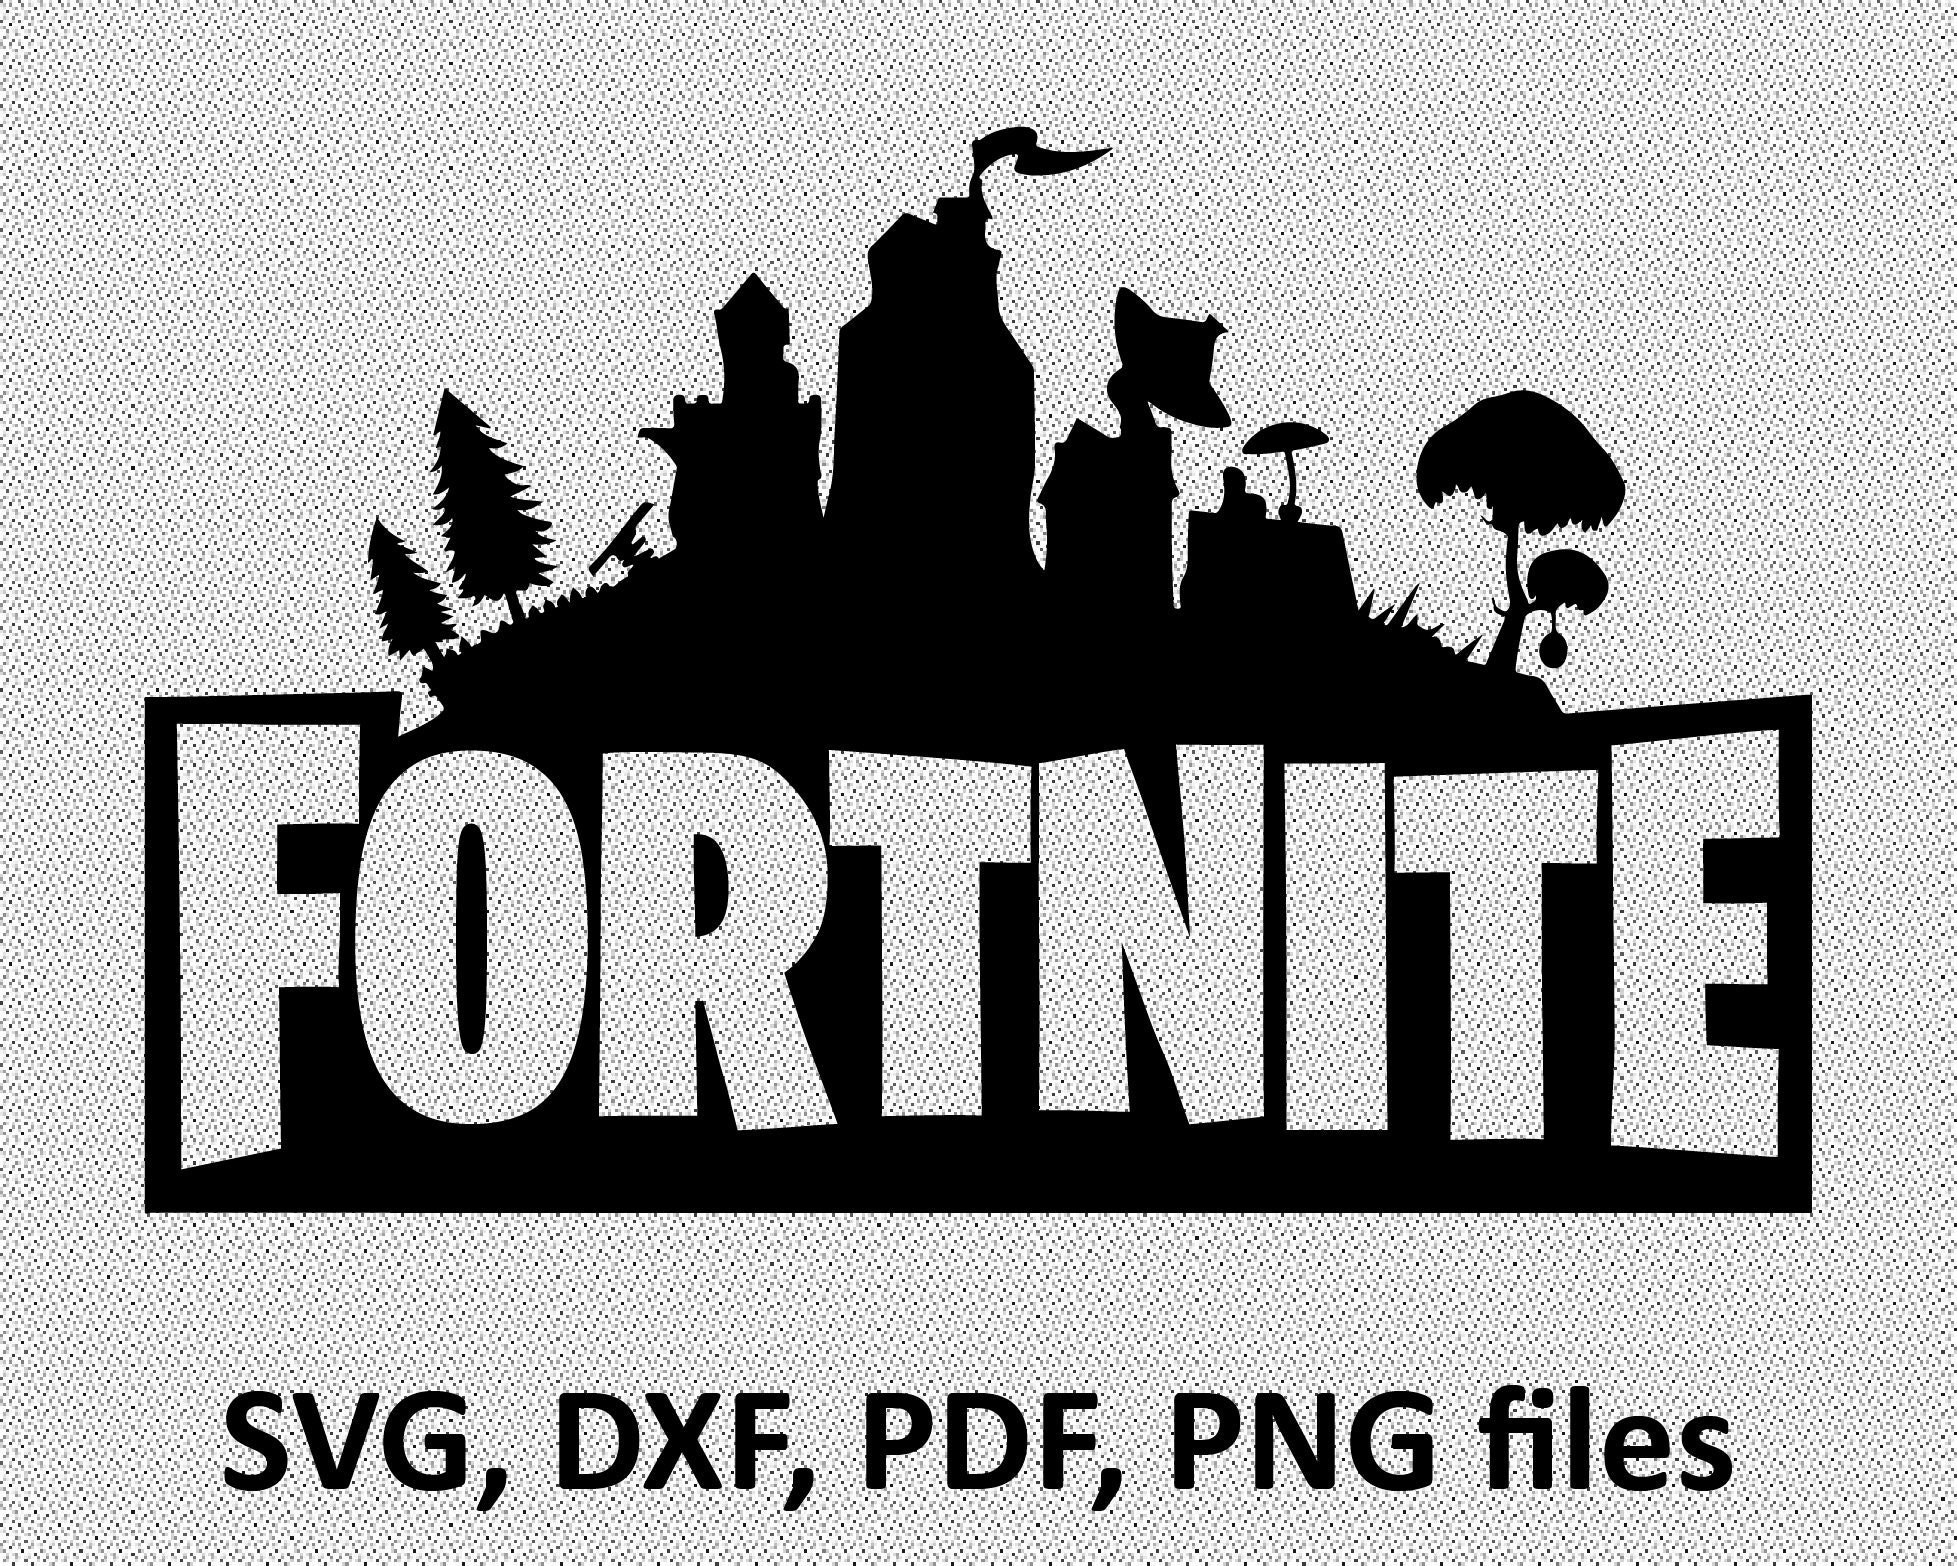 Download Free Fortnite Images For Cricut